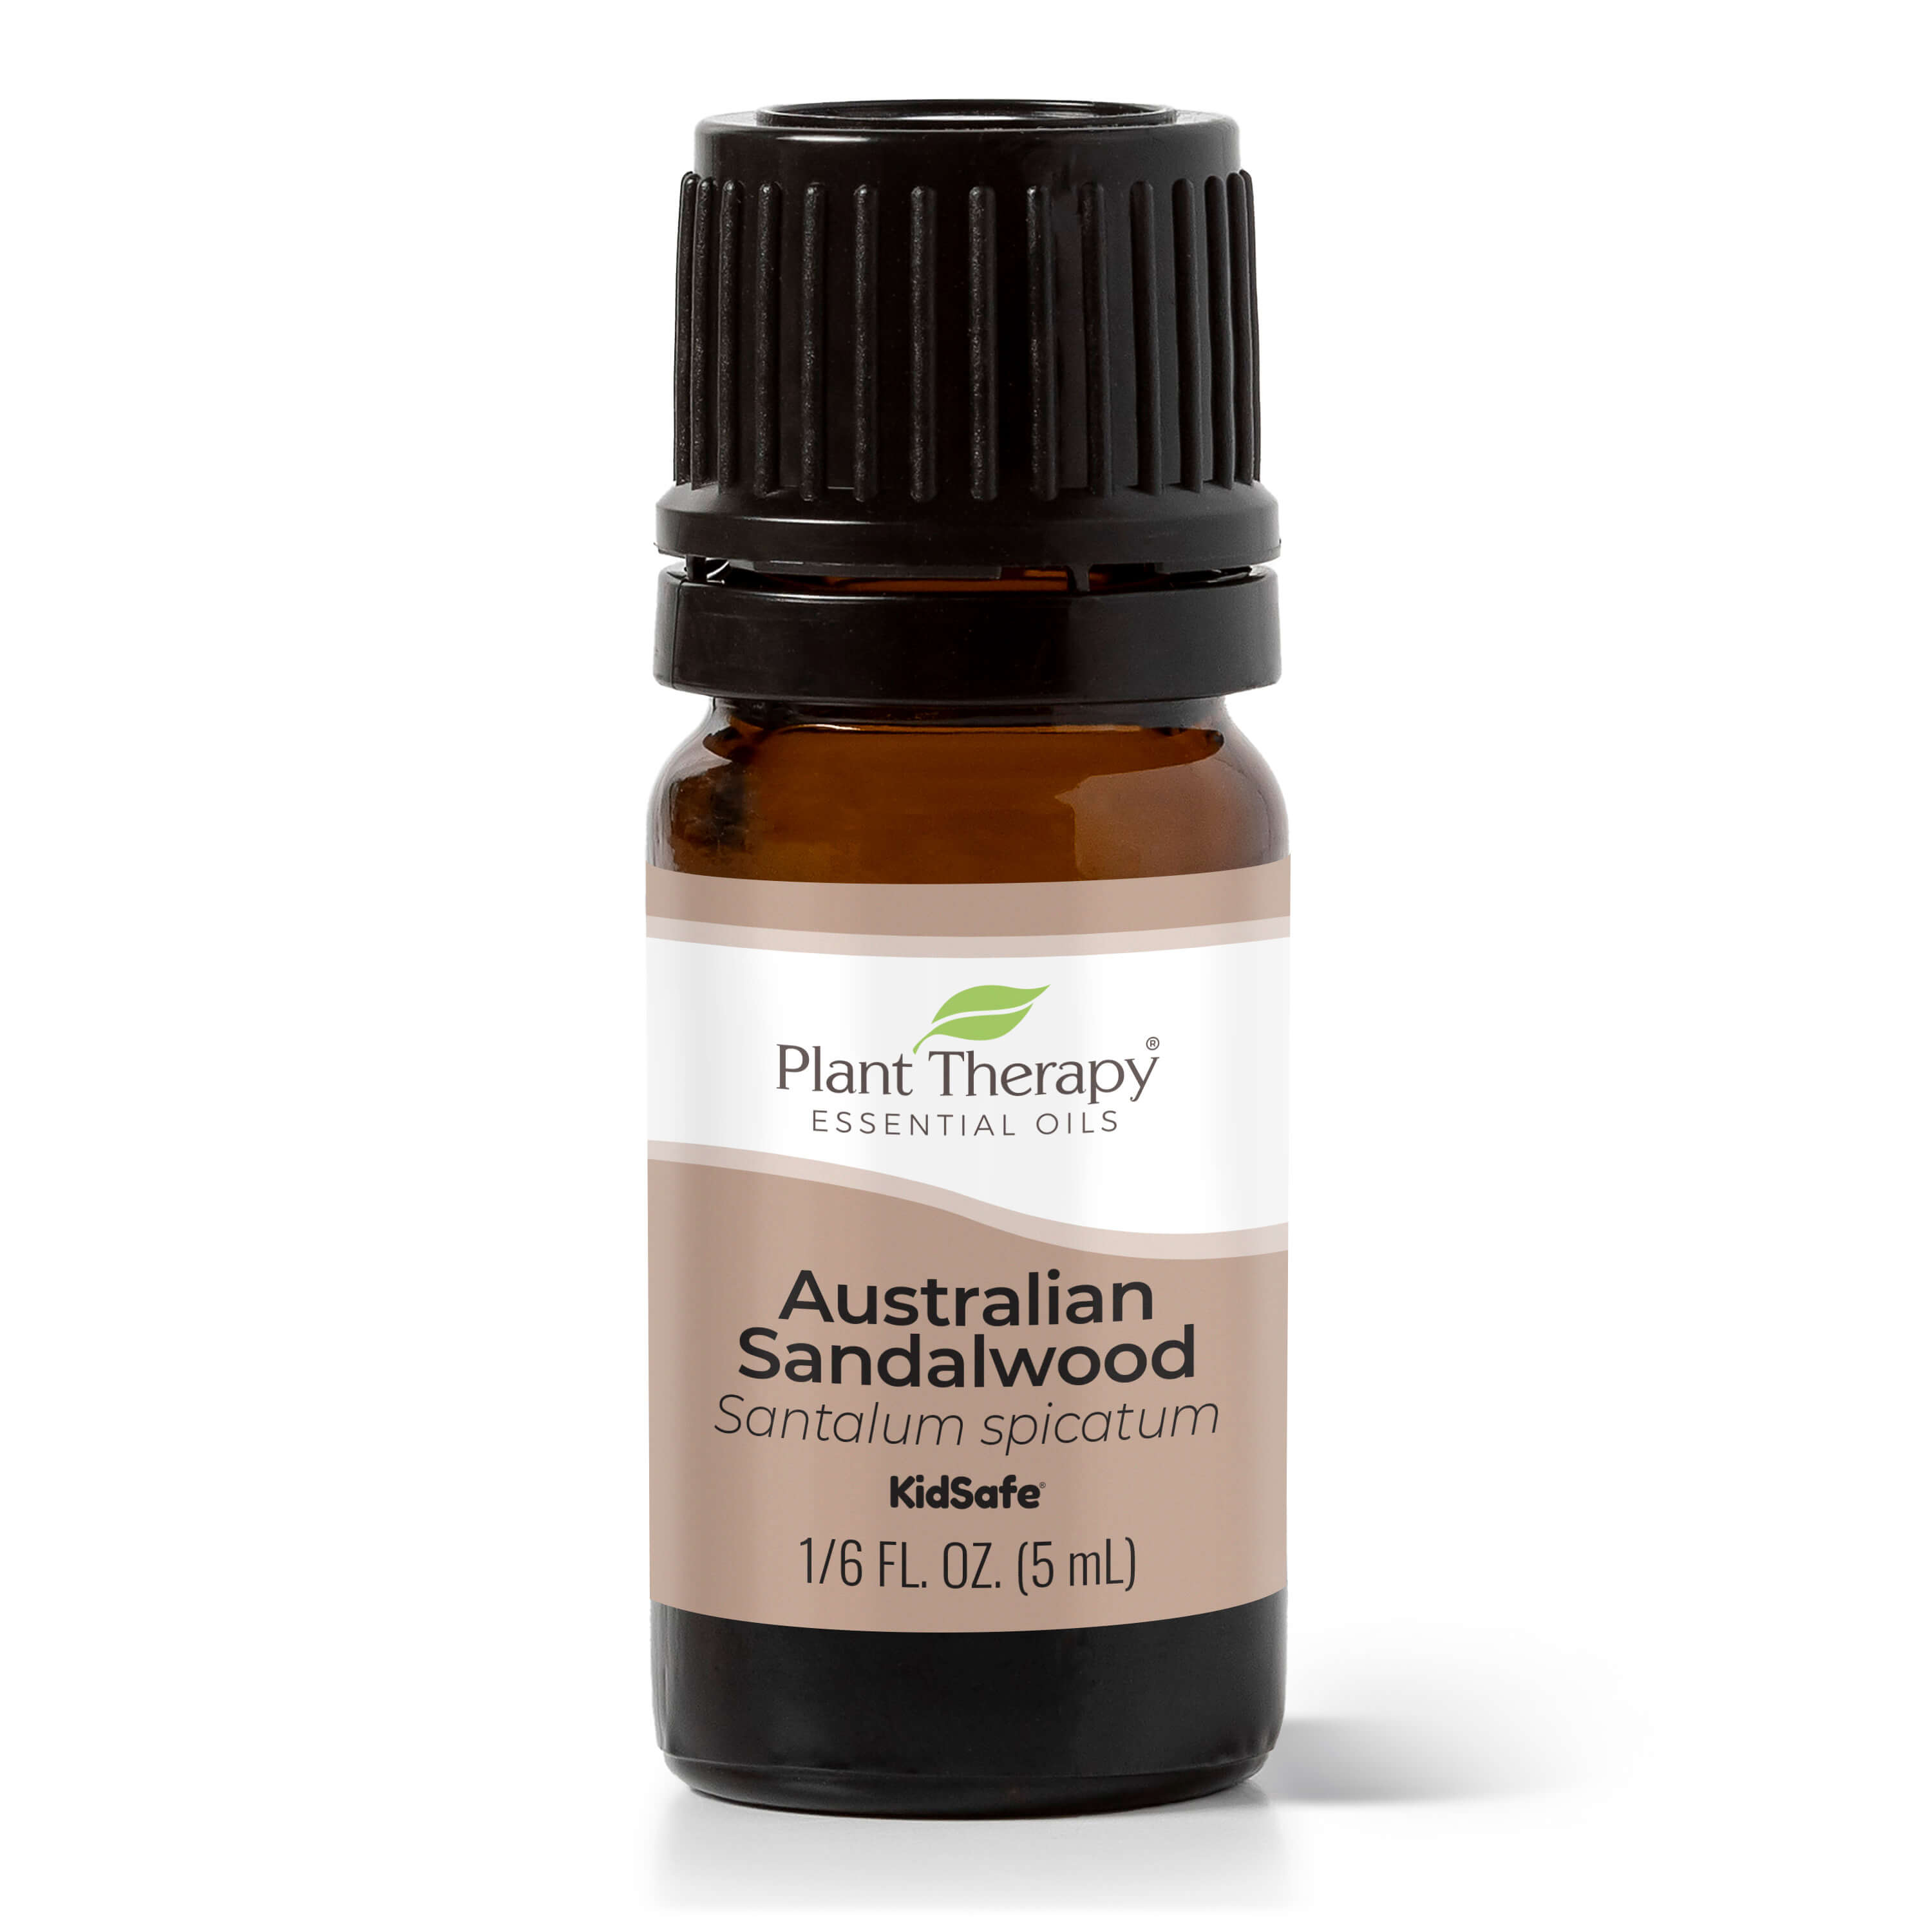 Plant Therapy Sandalwood Australian Essential Oil | 100% Pure, Undiluted, Natural Aromatherapy, Therapeutic Grade | 5 ml